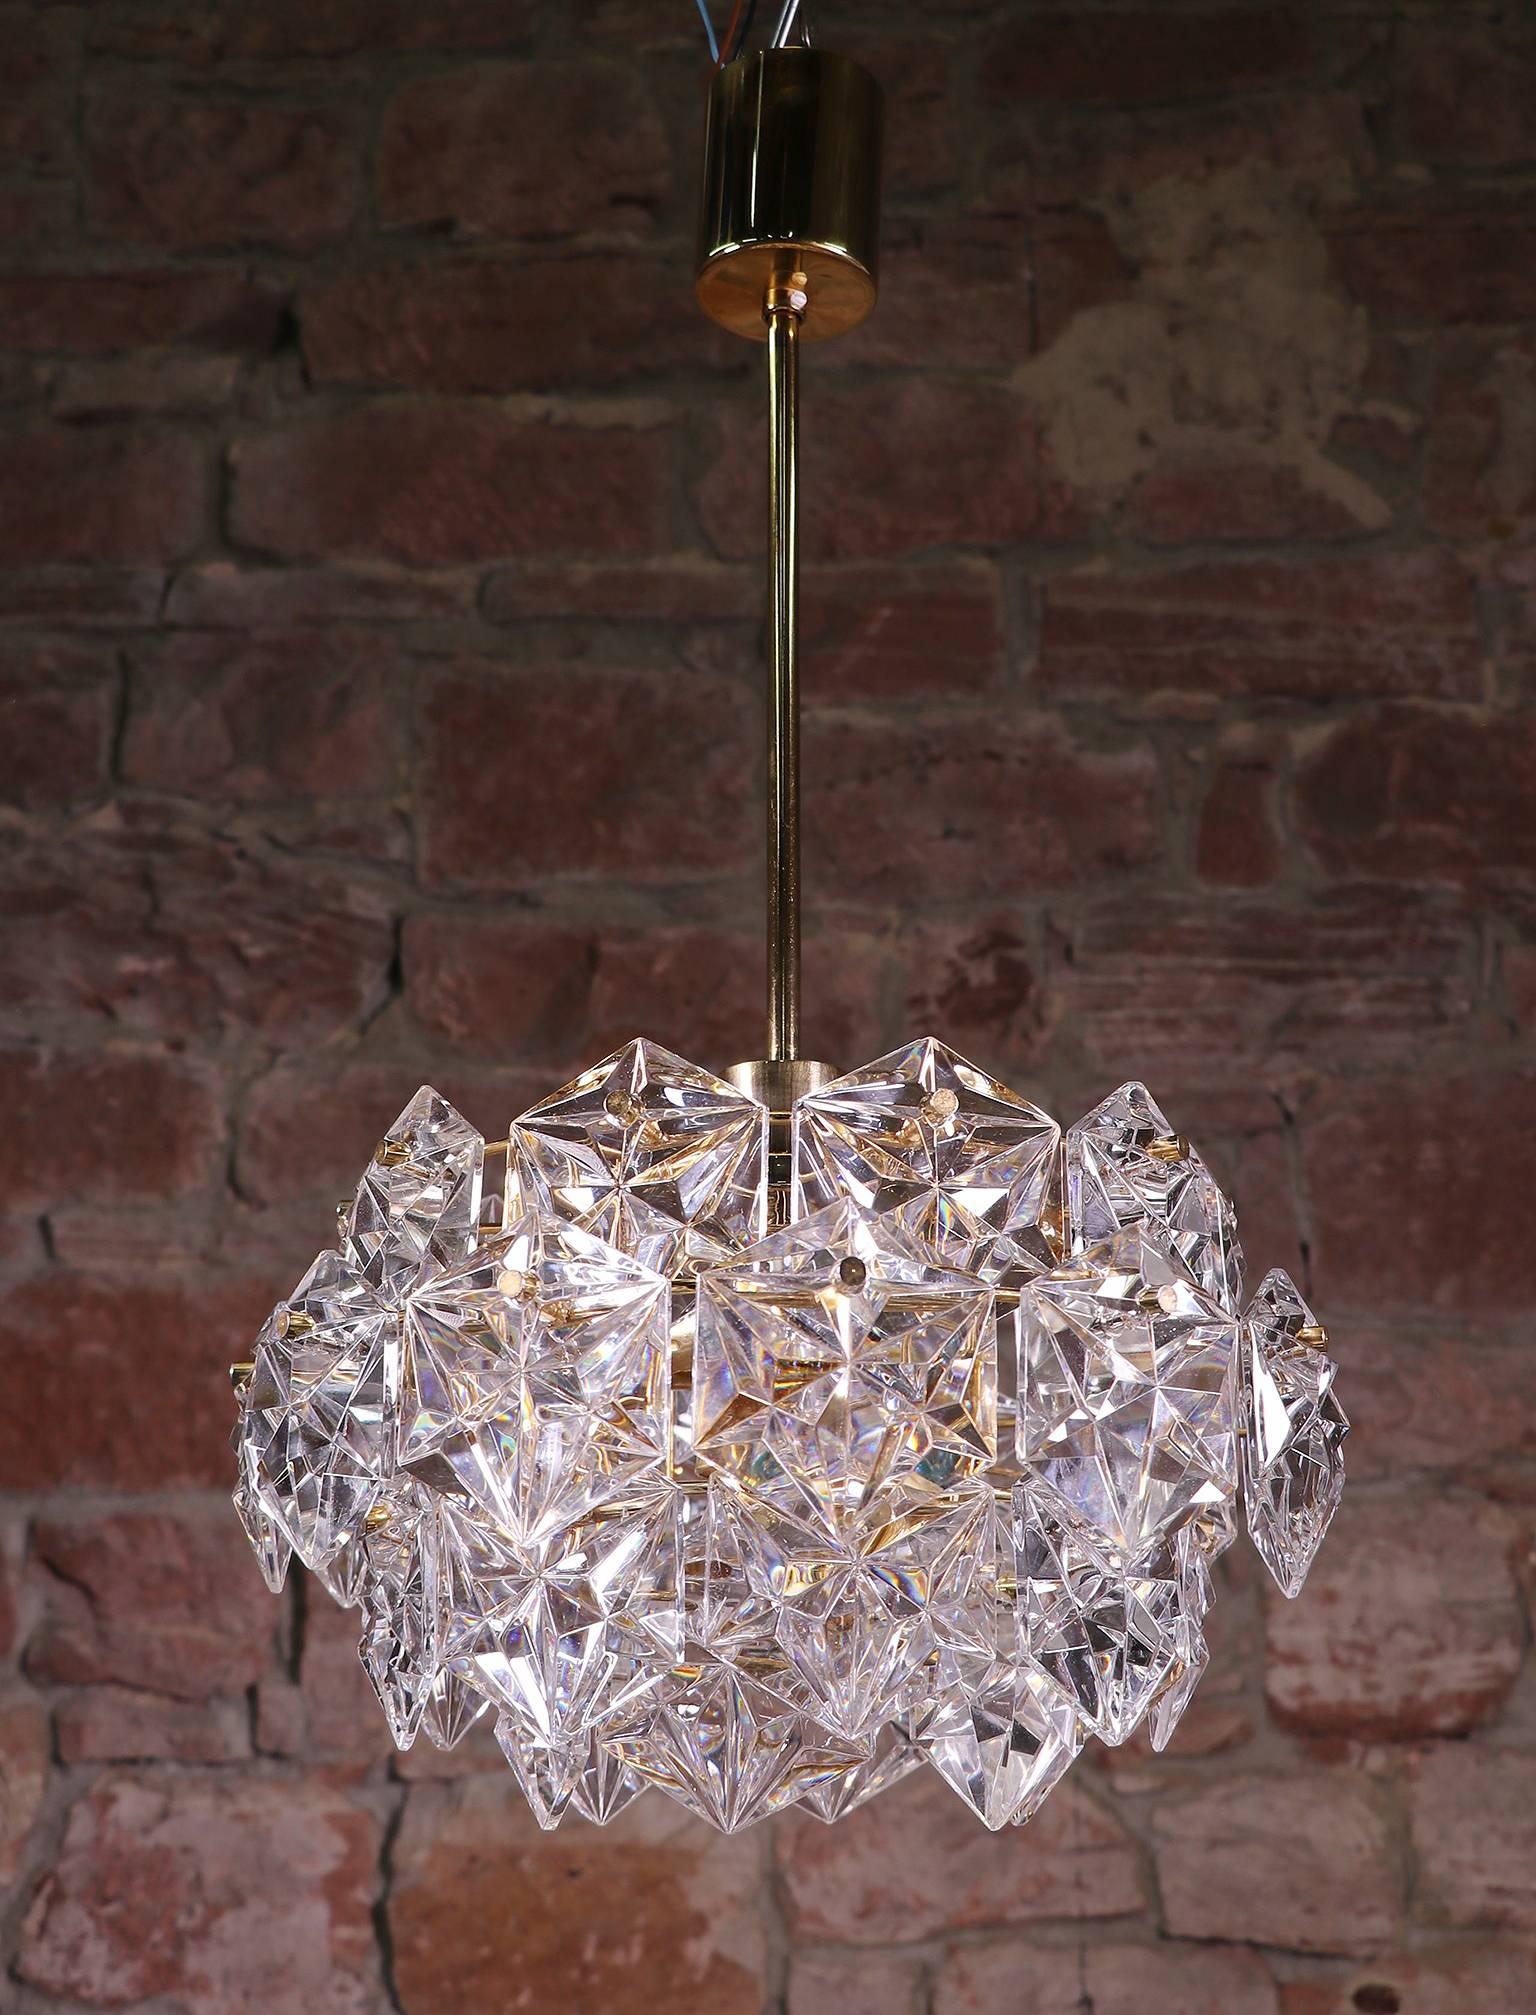 Four-tier chandelier with sculptural faceted crystals and gold-plated brass frame made by Kinkeldey, Germany in the 1960s.
The lamp takes one large and three small Edison base bulbs.